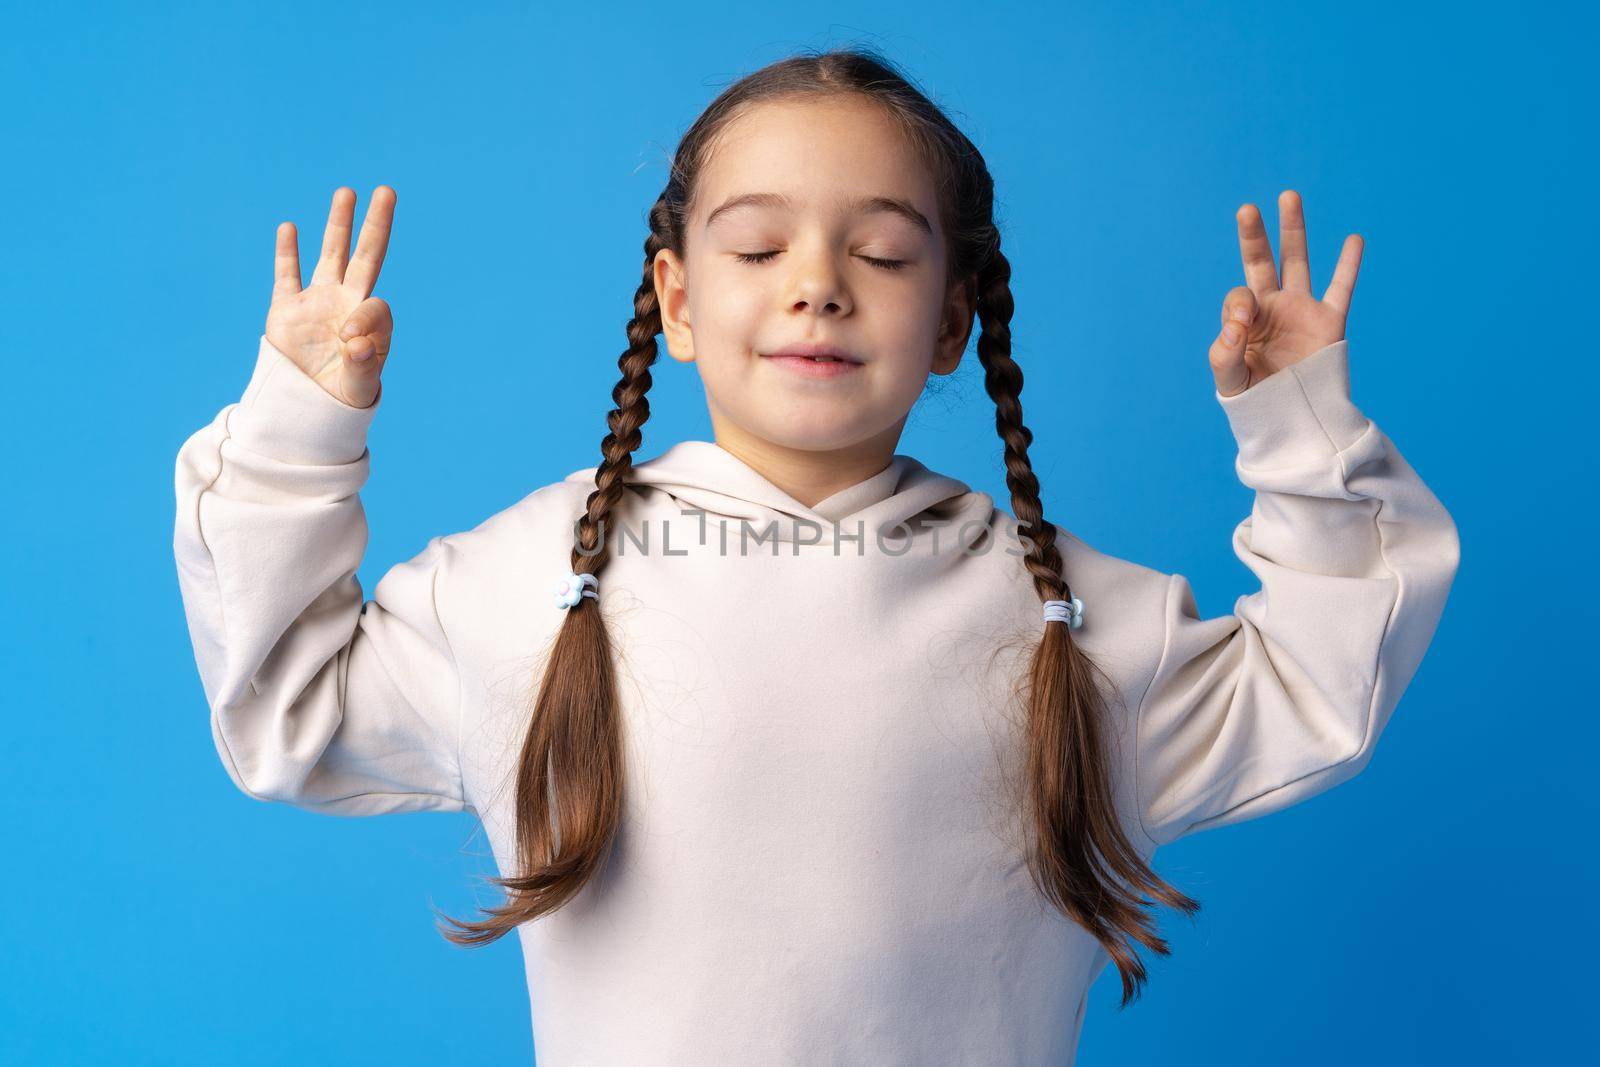 Little girl with braids standing in zen pose against blue backgorund by Fabrikasimf